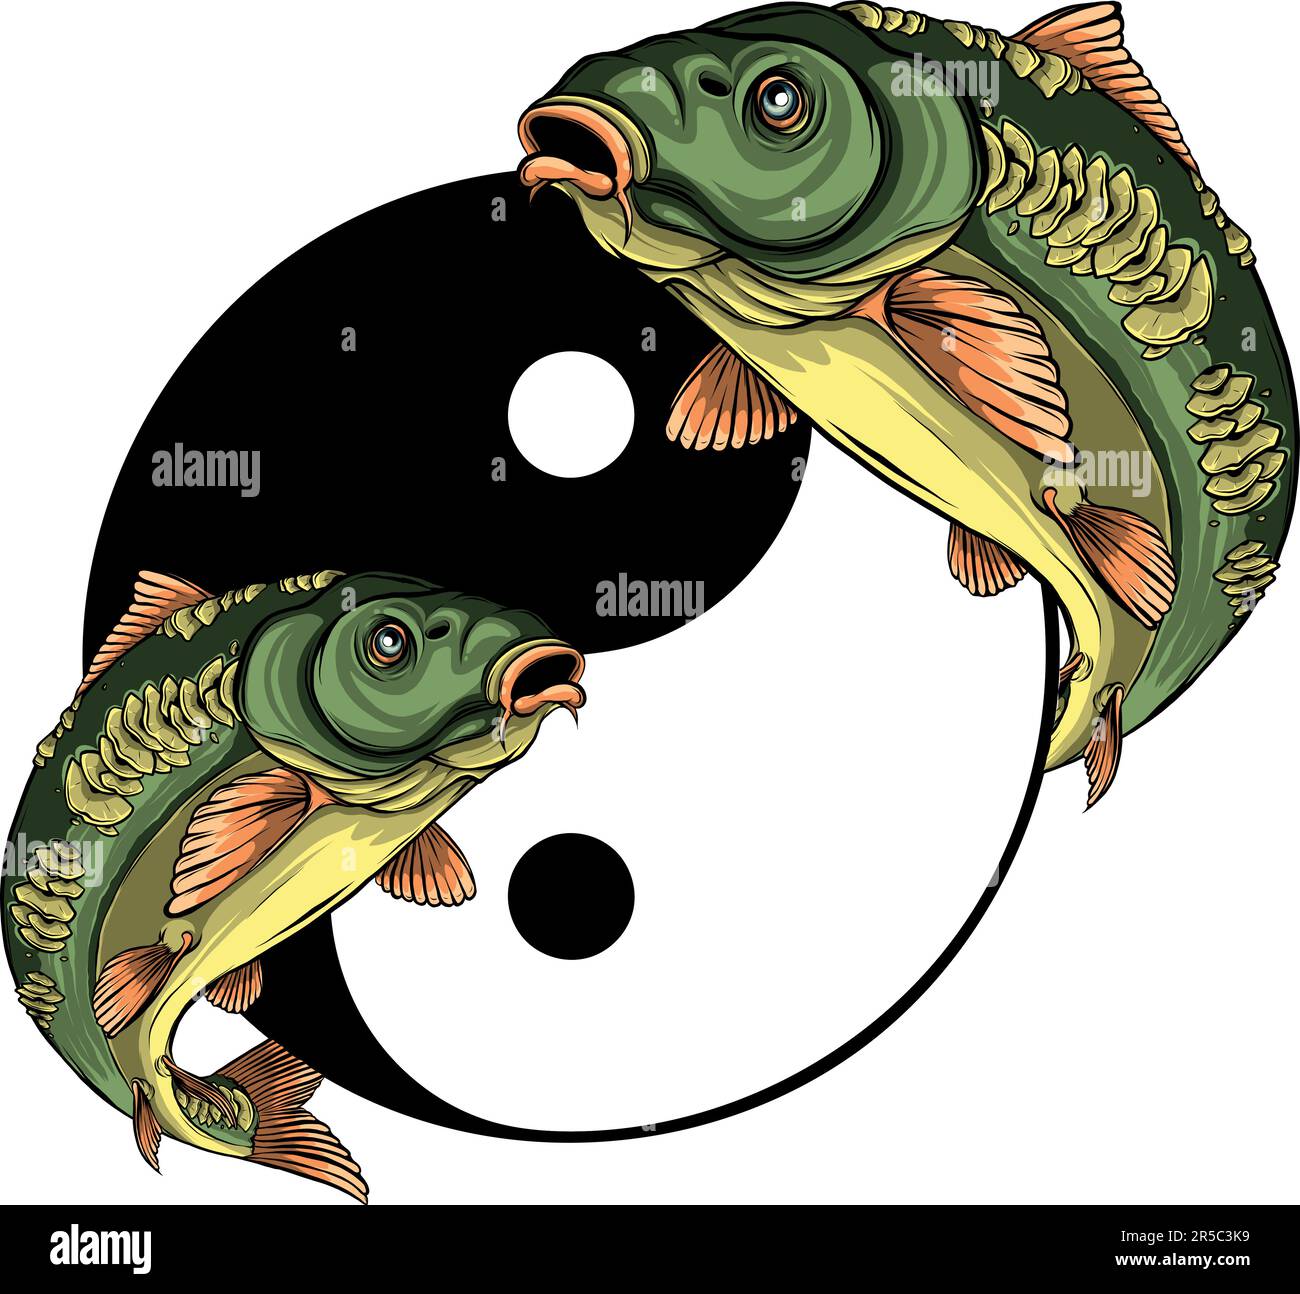 vector illustration of two carp fishes in the circle of yin yang symbol. Stock Vector